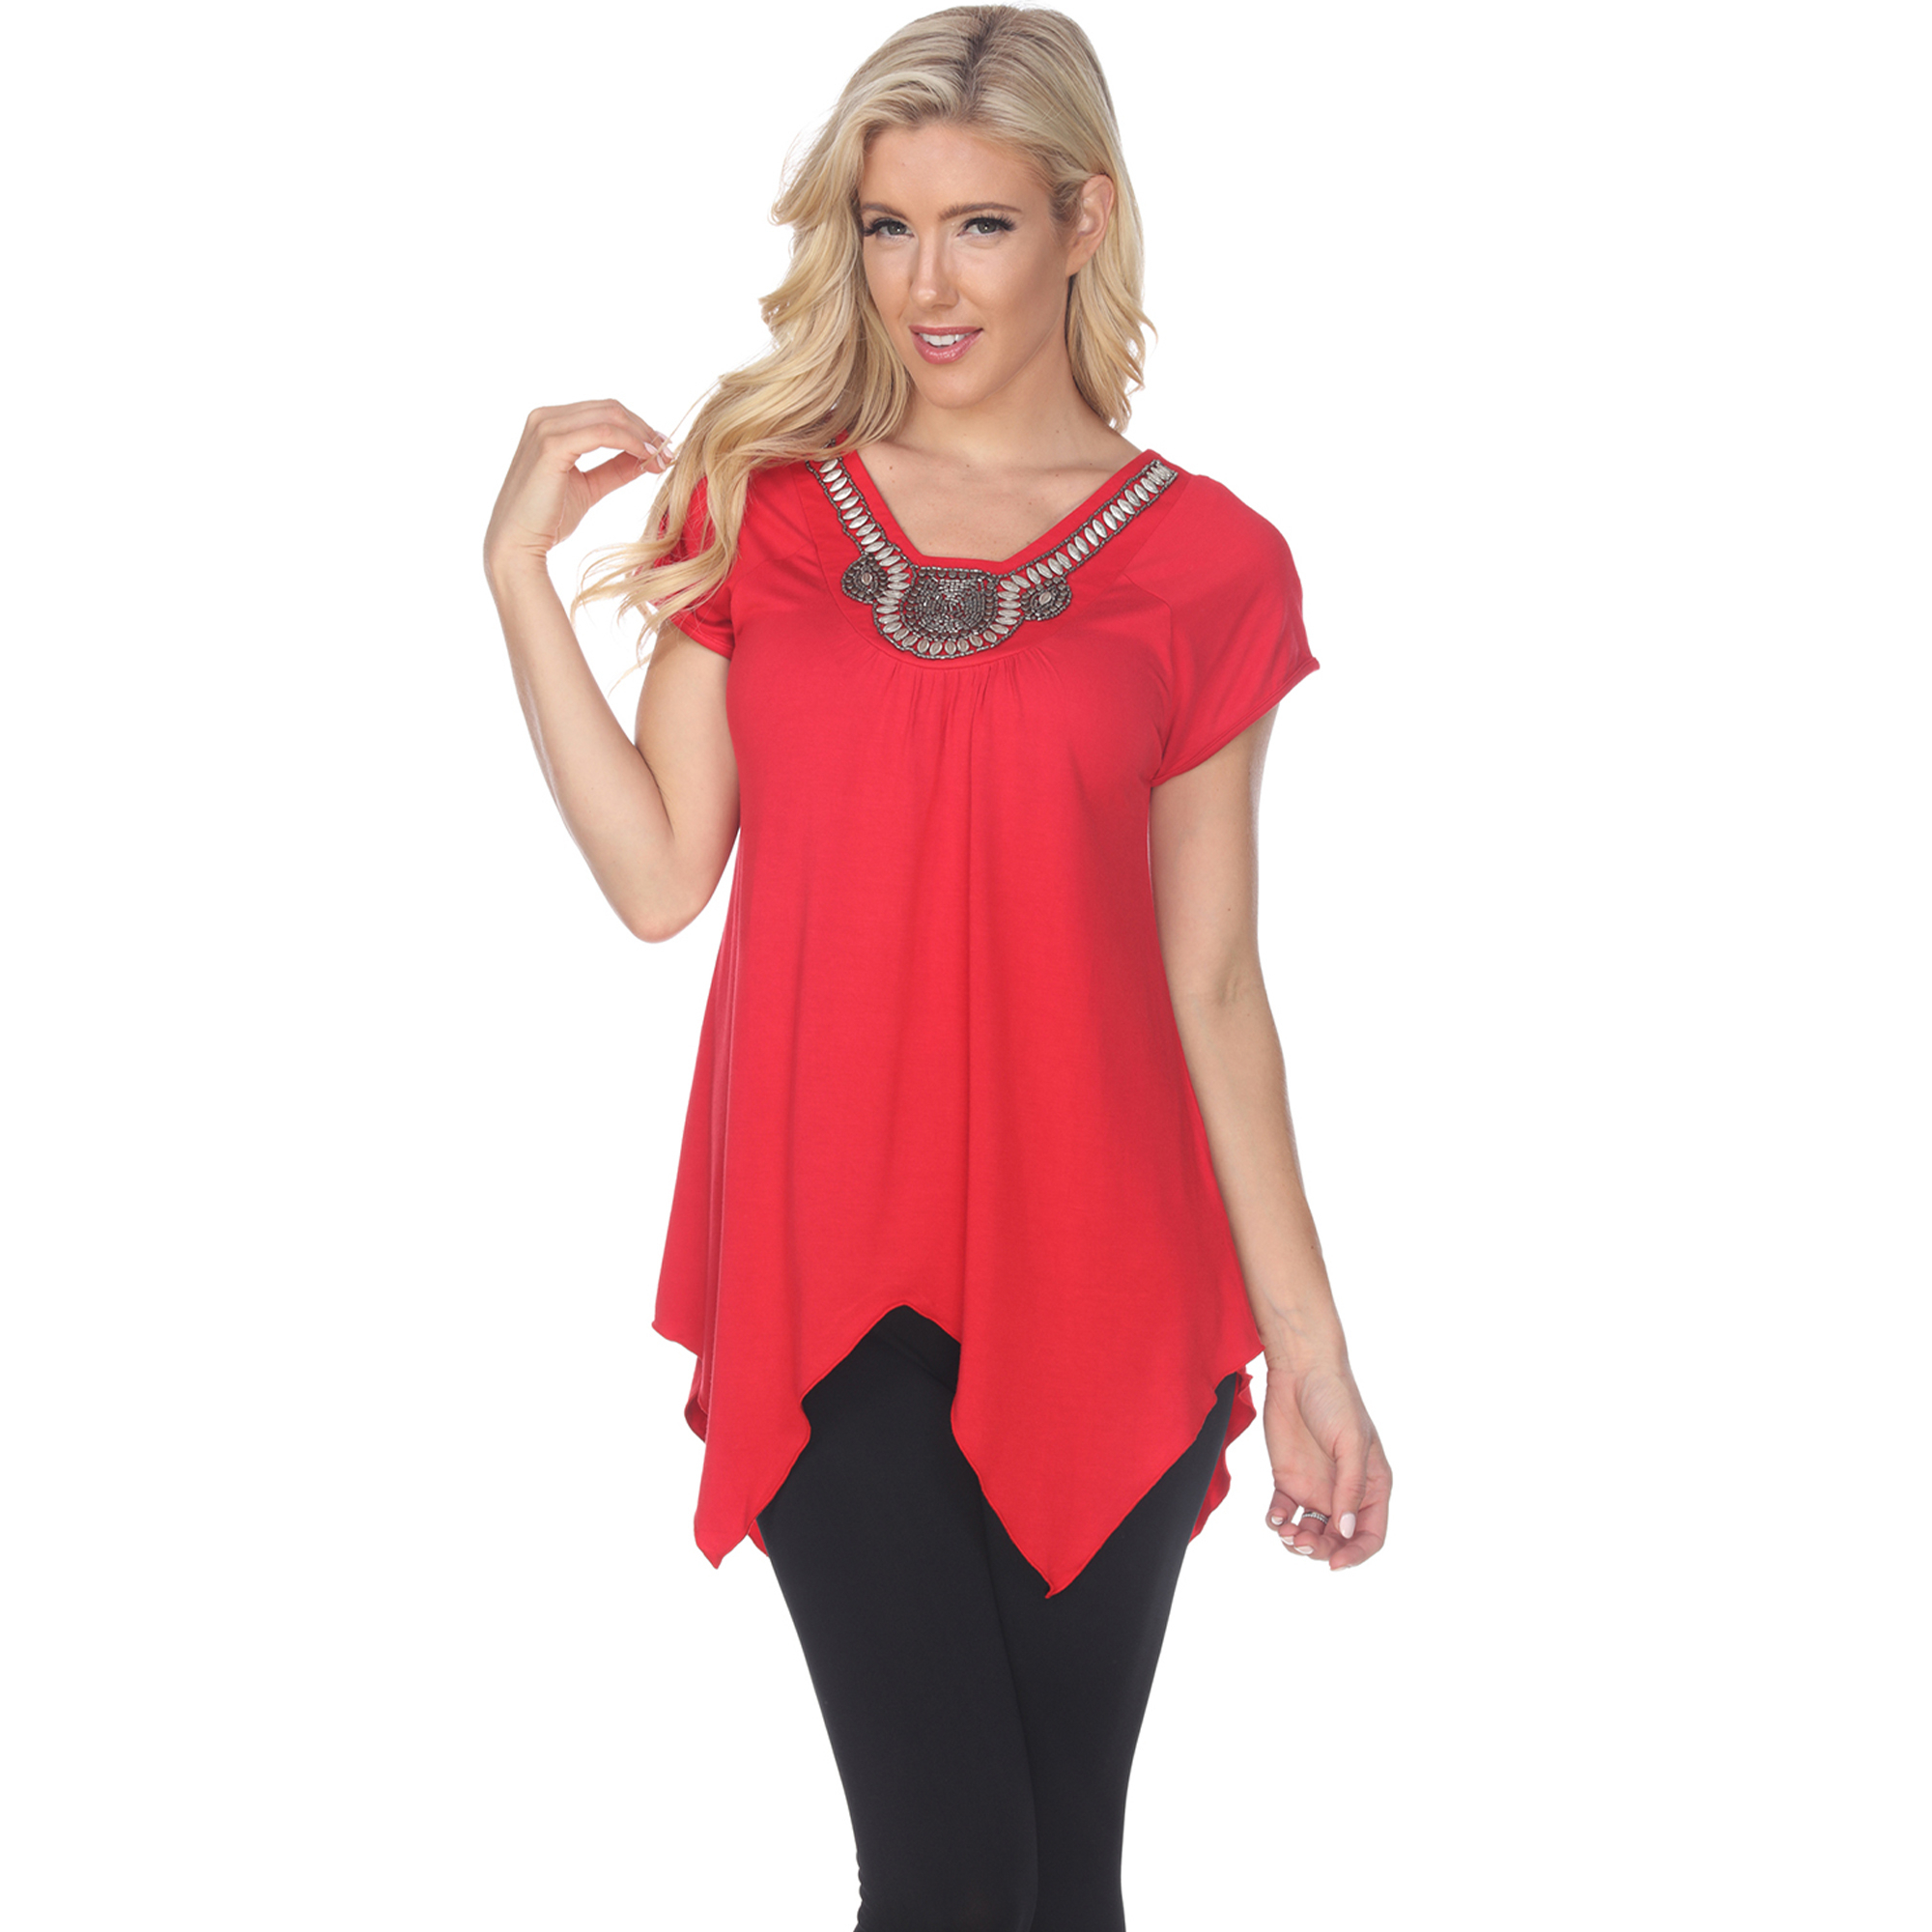 White Mark Women's Embellished Tunic Top - Red, 1X